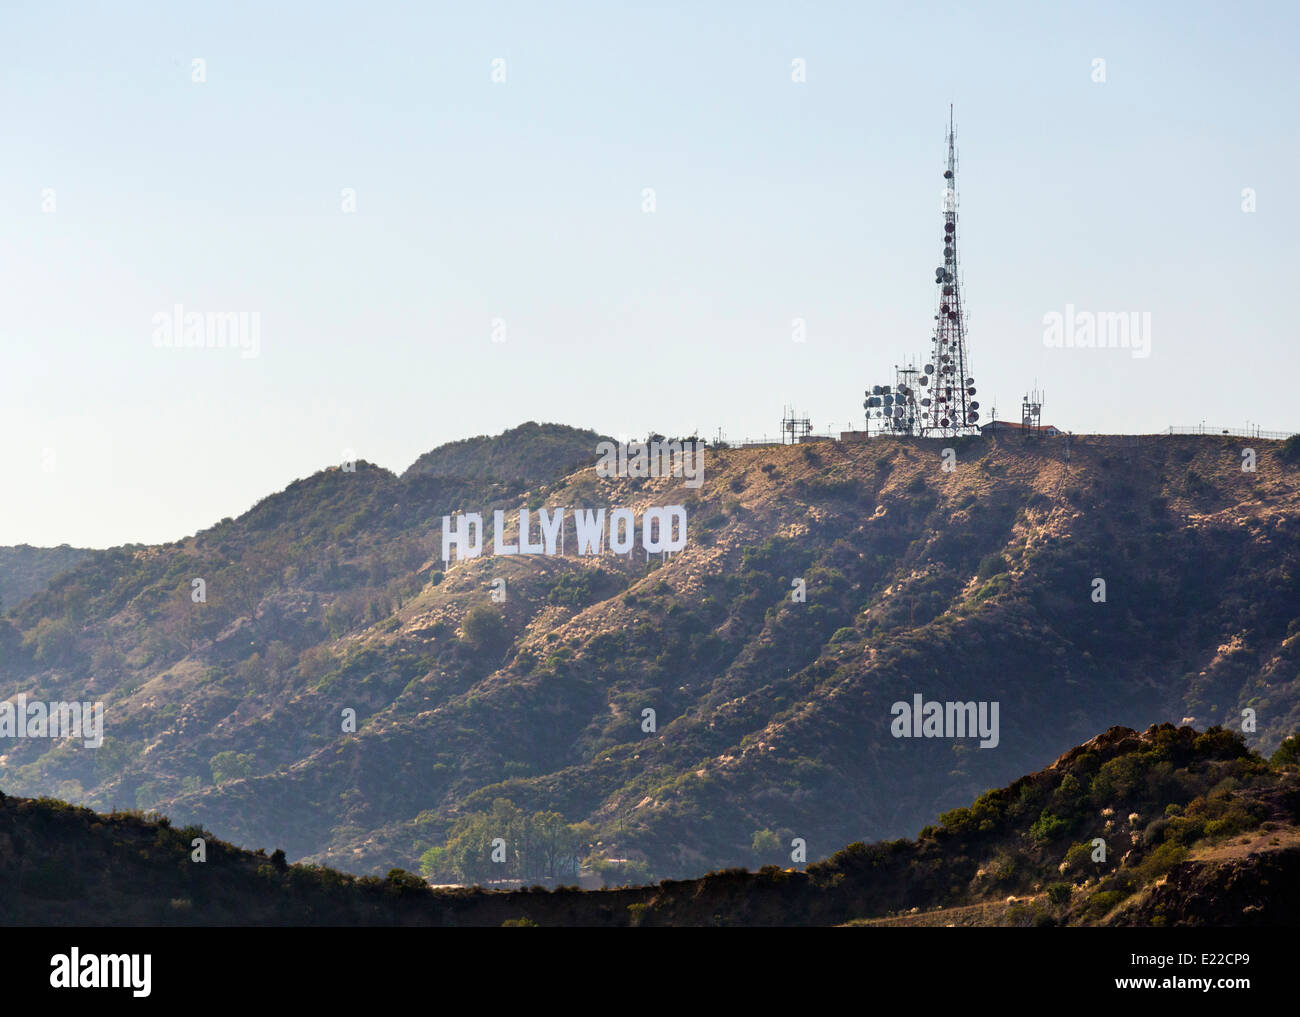 The Hollywood sign from Griffith Park, Mount Hollywood, Los Angeles, California, USA Stock Photo